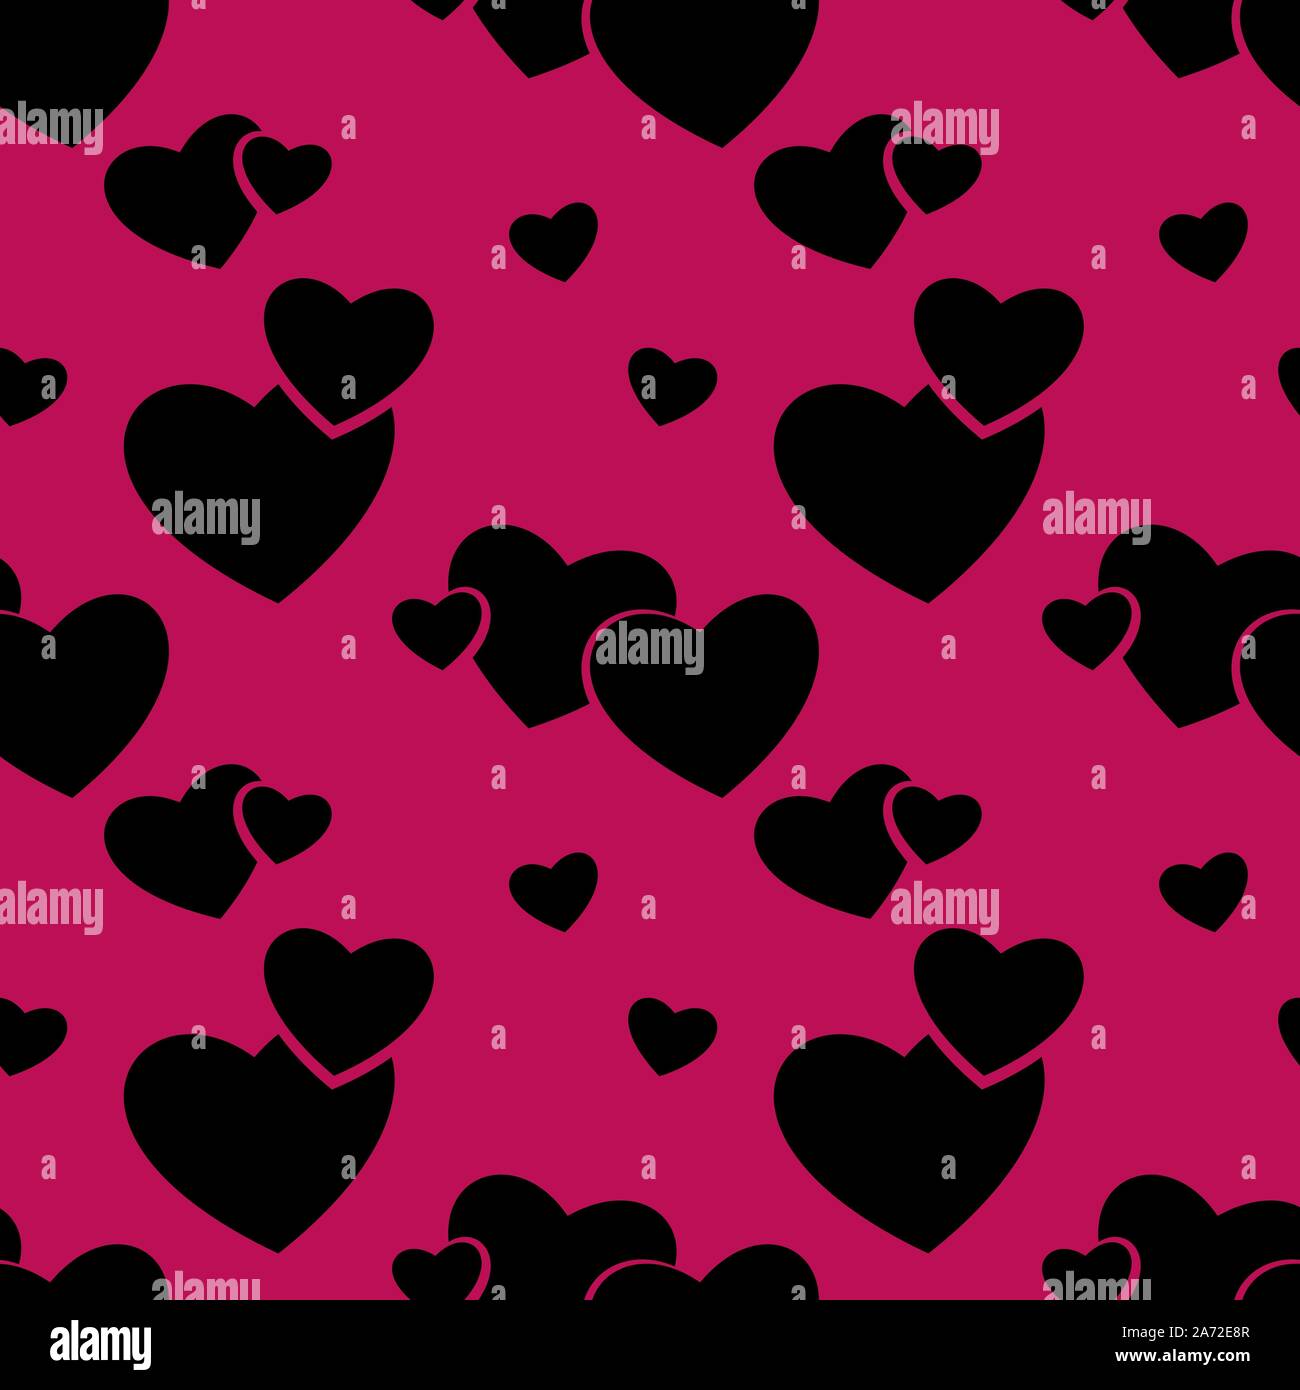 Black and Pink Heart background  Free Background Loops  background video  love  TikTok Eye Trend  YouTube